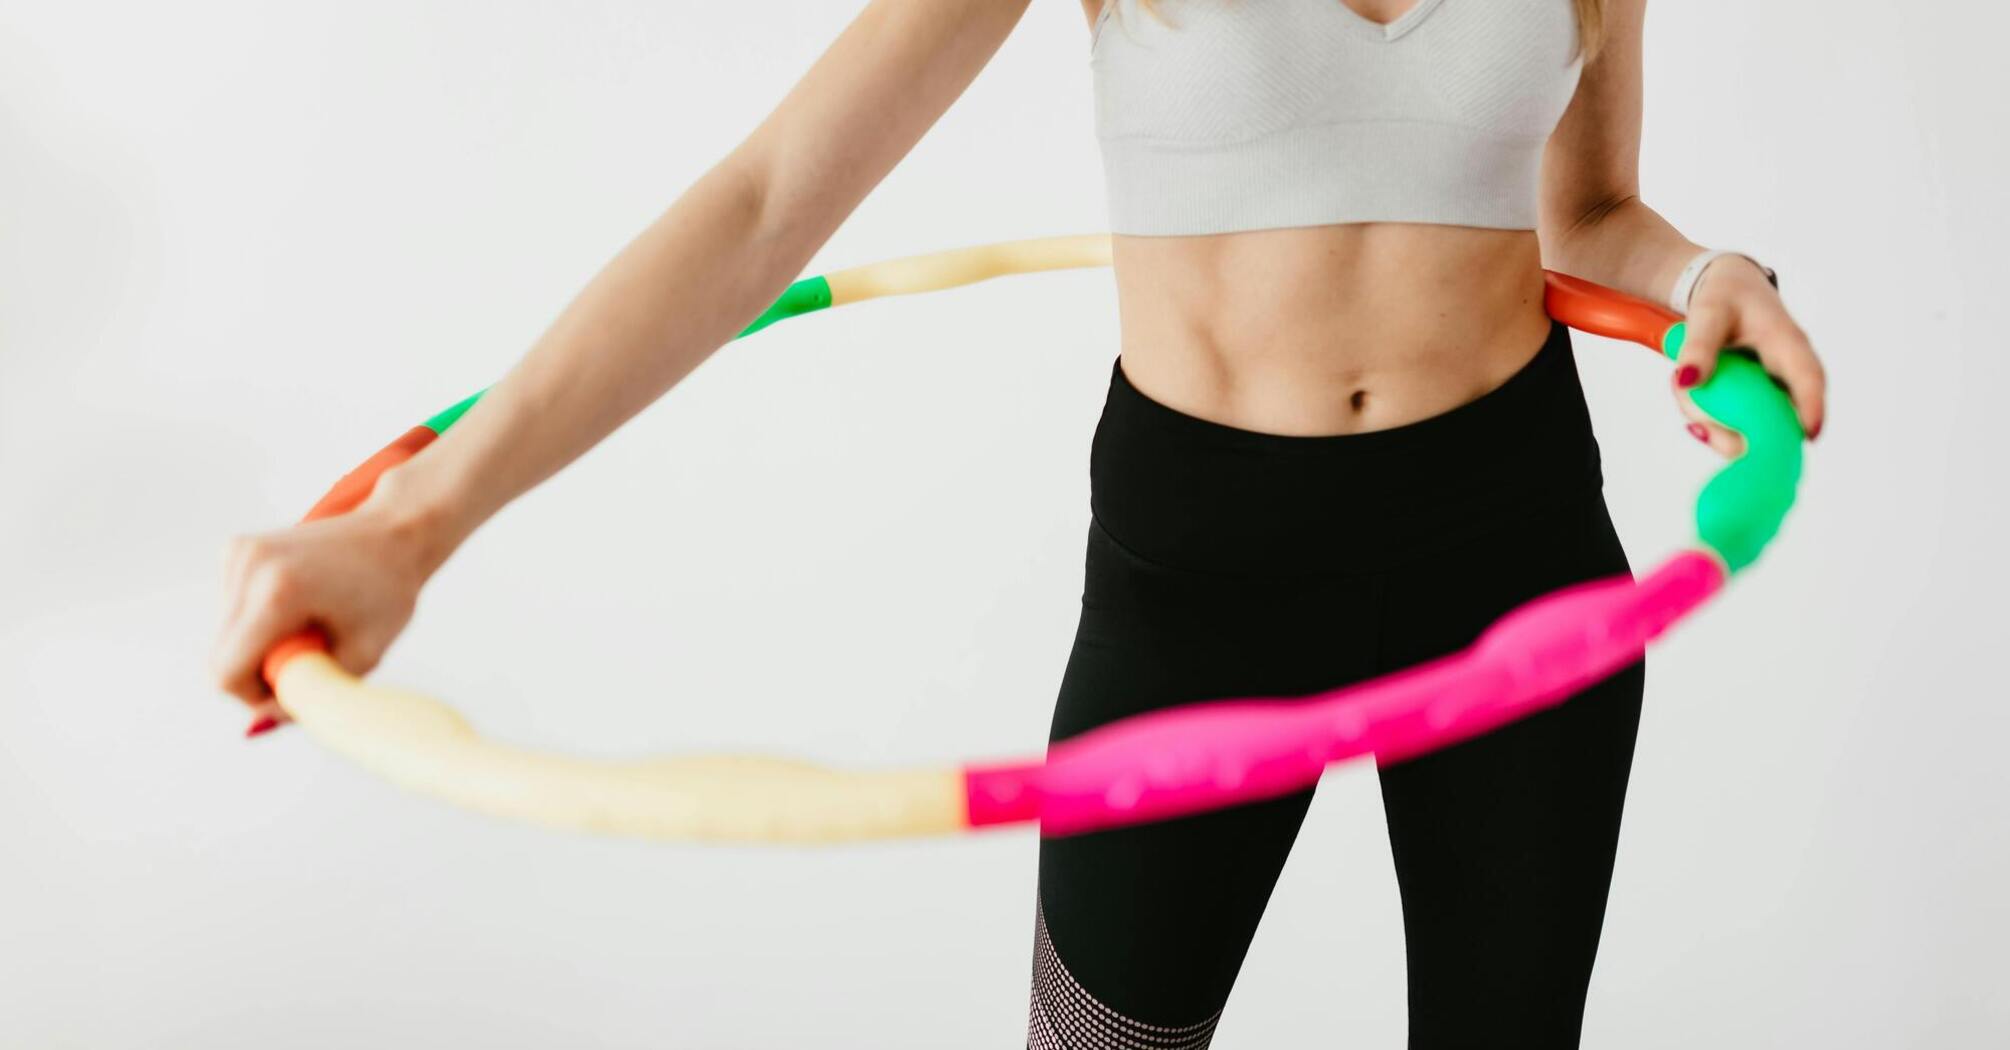 A person in a white sports top and black leggings holding a colorful hula hoop at waist level